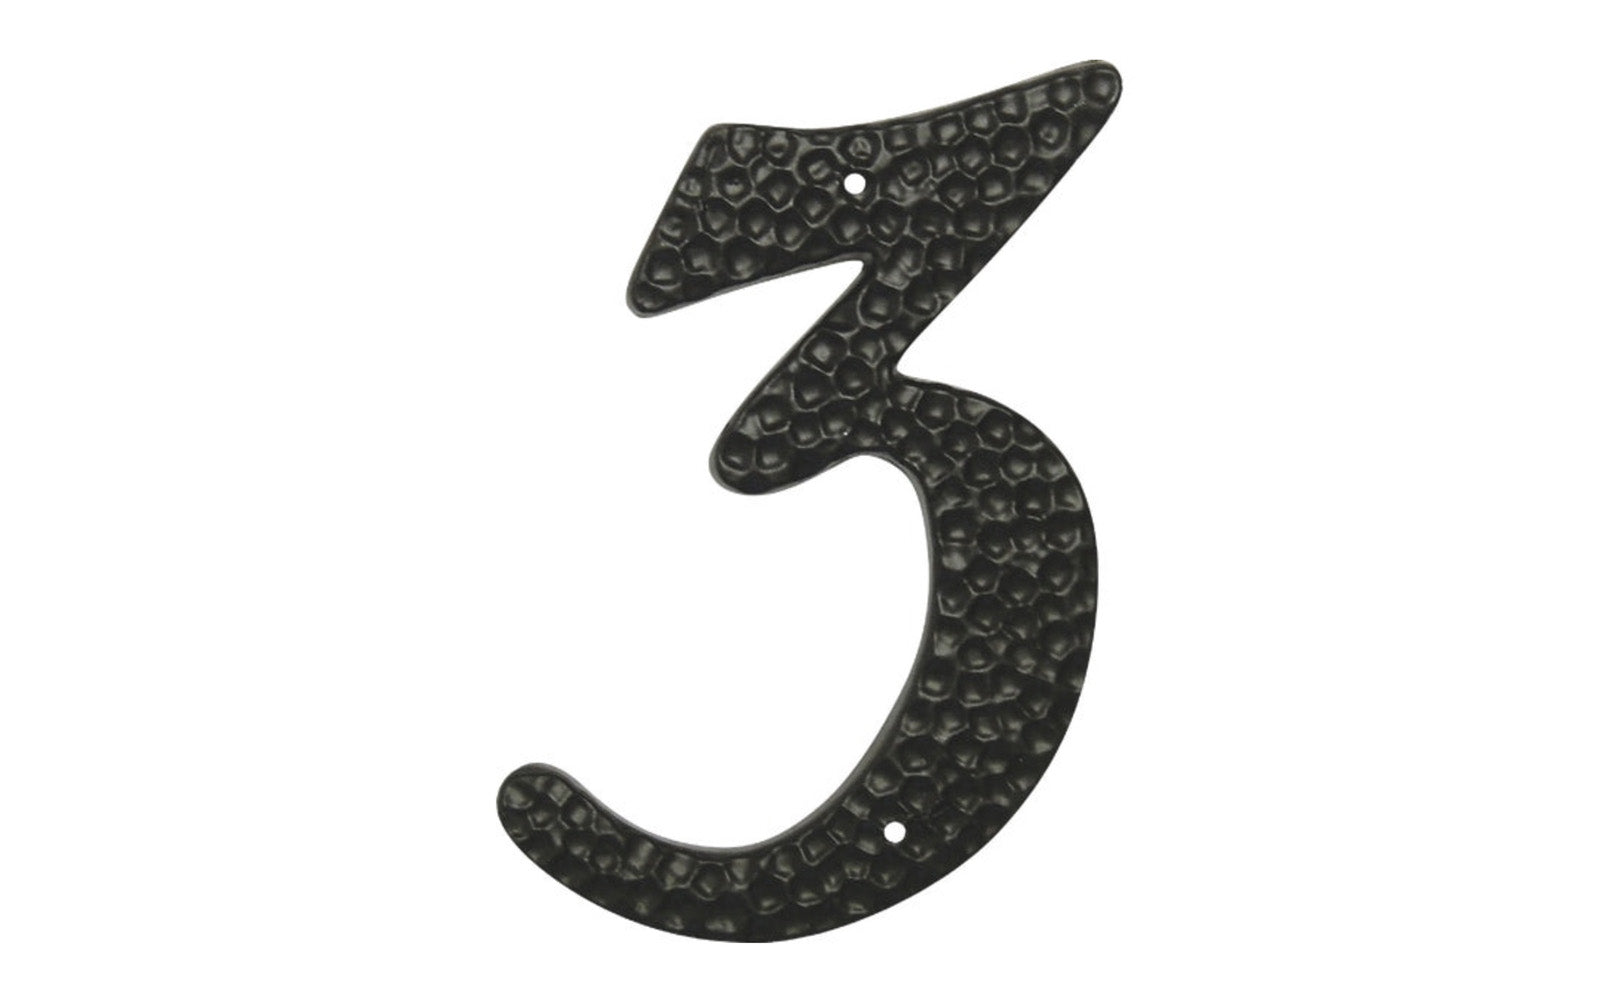 Number Three Black Hammered House Number in a 3-1/2" Size. Made of die-cast aluminum material with a black hammered style. Mounting nails included. #3 House Number. Hy-Ko Model No. DC-3/3. 029069201036